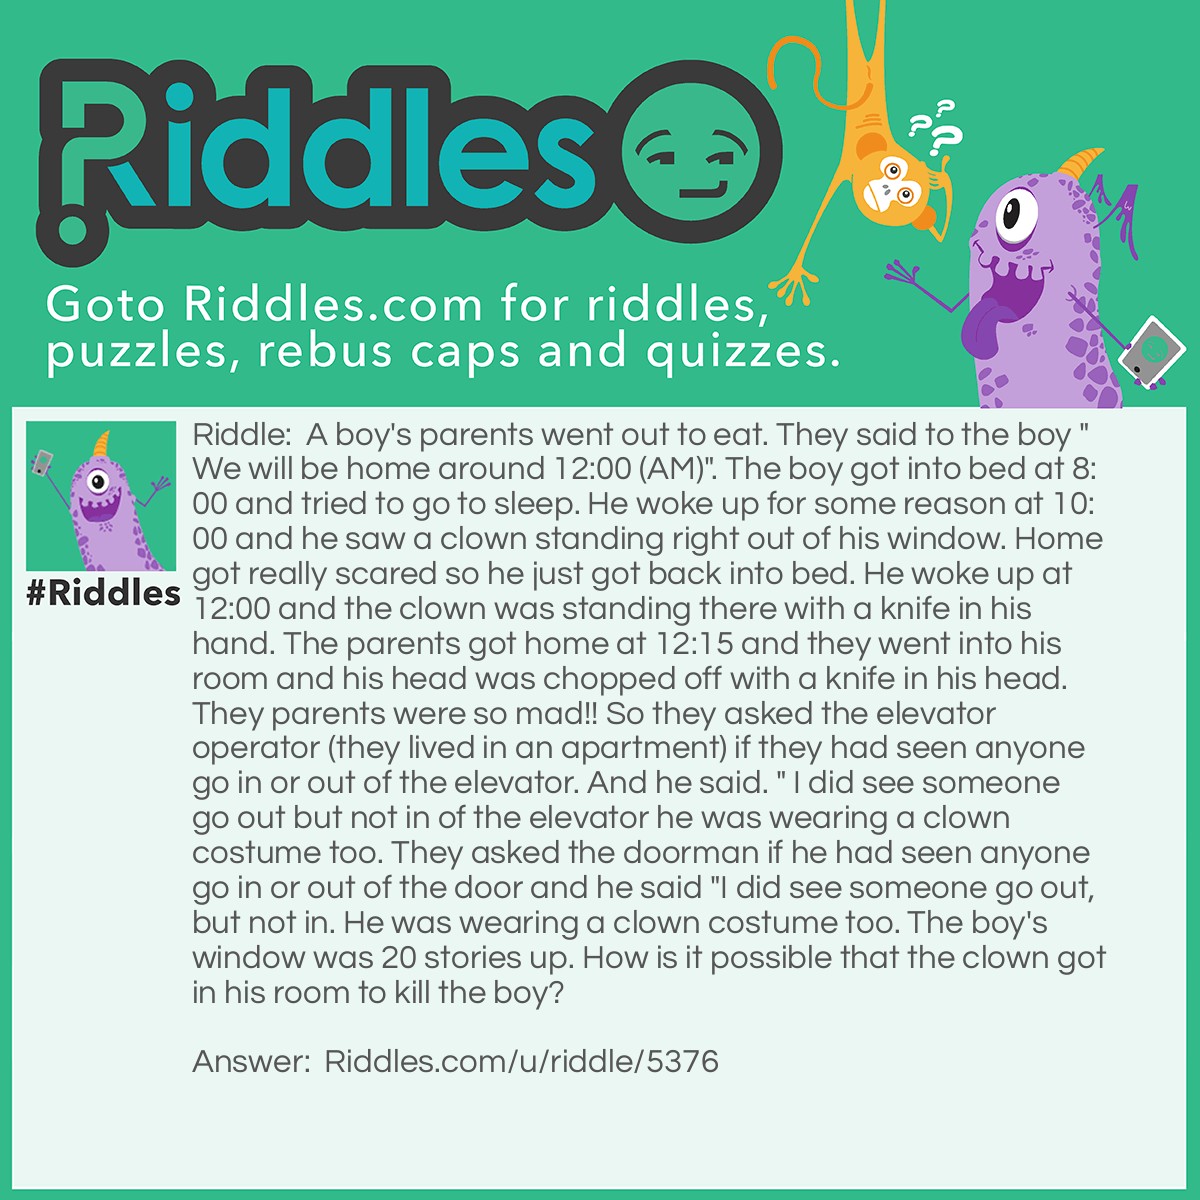 Riddle: A boy's parents went out to eat. They said to the boy "We will be home around 12:00 (AM)". The boy got into bed at 8:00 and tried to go to sleep. He woke up for some reason at 10:00 and he saw a clown standing right out of his window. Home got really scared so he just got back into bed. He woke up at 12:00 and the clown was standing there with a knife in his hand. The parents got home at 12:15 and they went into his room and his head was chopped off with a knife in his head. They parents were so mad!! So they asked the elevator operator (they lived in an apartment) if they had seen anyone go in or out of the elevator. And he said. " I did see someone go out but not in of the elevator he was wearing a clown costume too. They asked the doorman if he had seen anyone go in or out of the door and he said "I did see someone go out, but not in. He was wearing a clown costume too. The boy's window was 20 stories up. How is it possible that the clown got in his room to kill the boy? Answer: It was just a reflection of the clown in the window. The clown was really behind the boy.